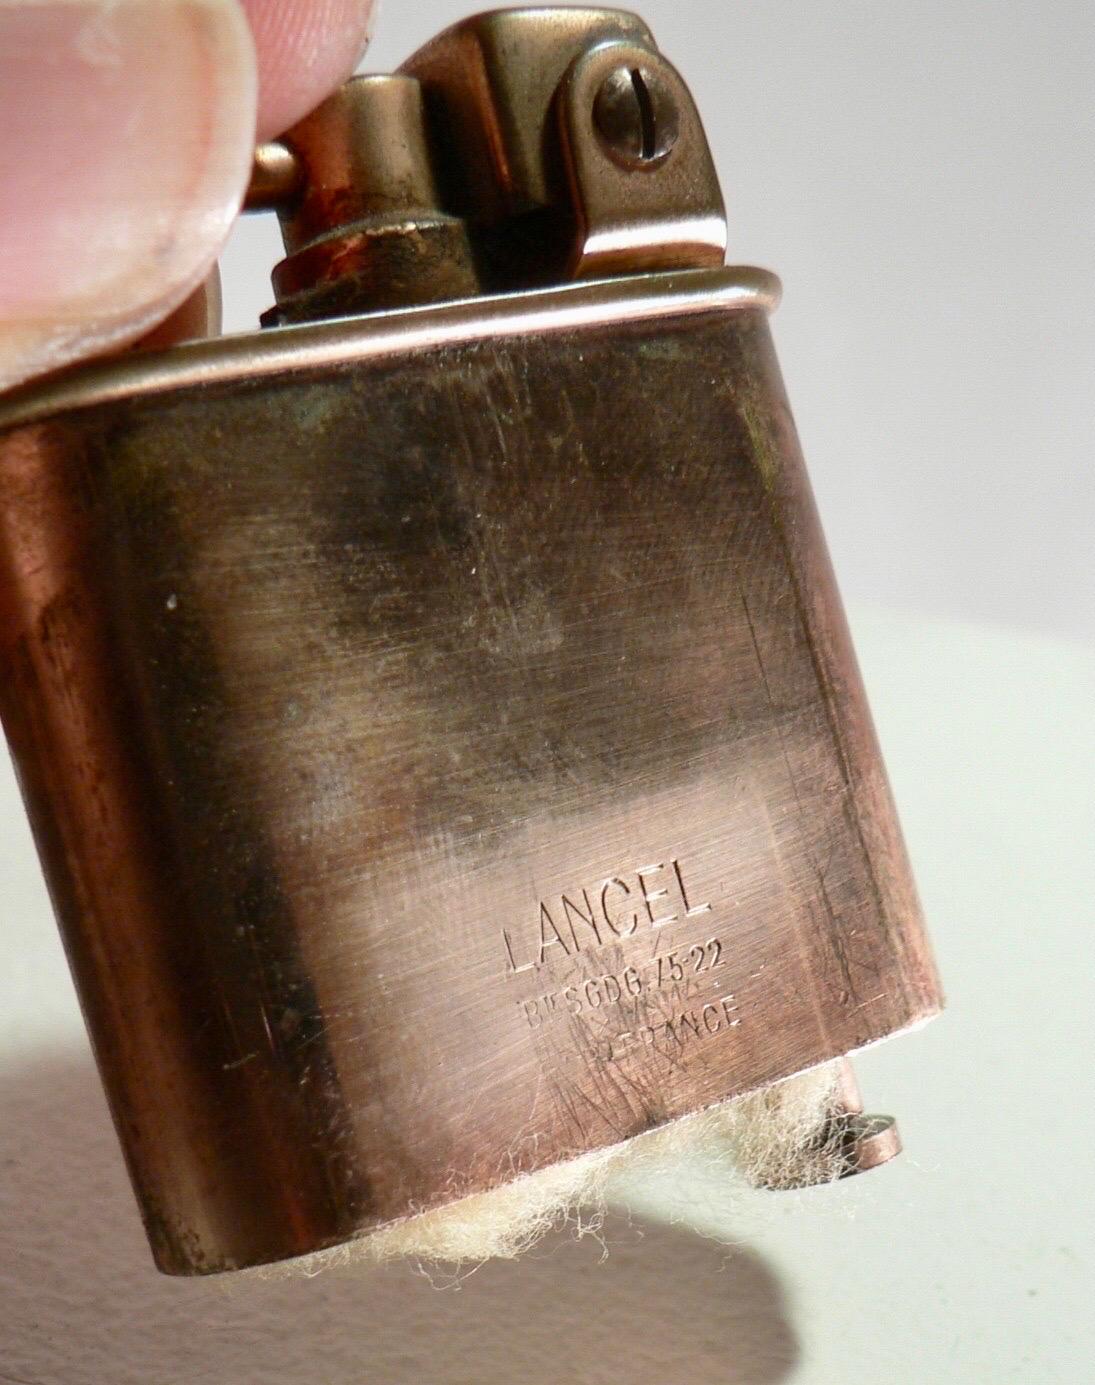 Early 20th Century Table lighter Lancel  - 